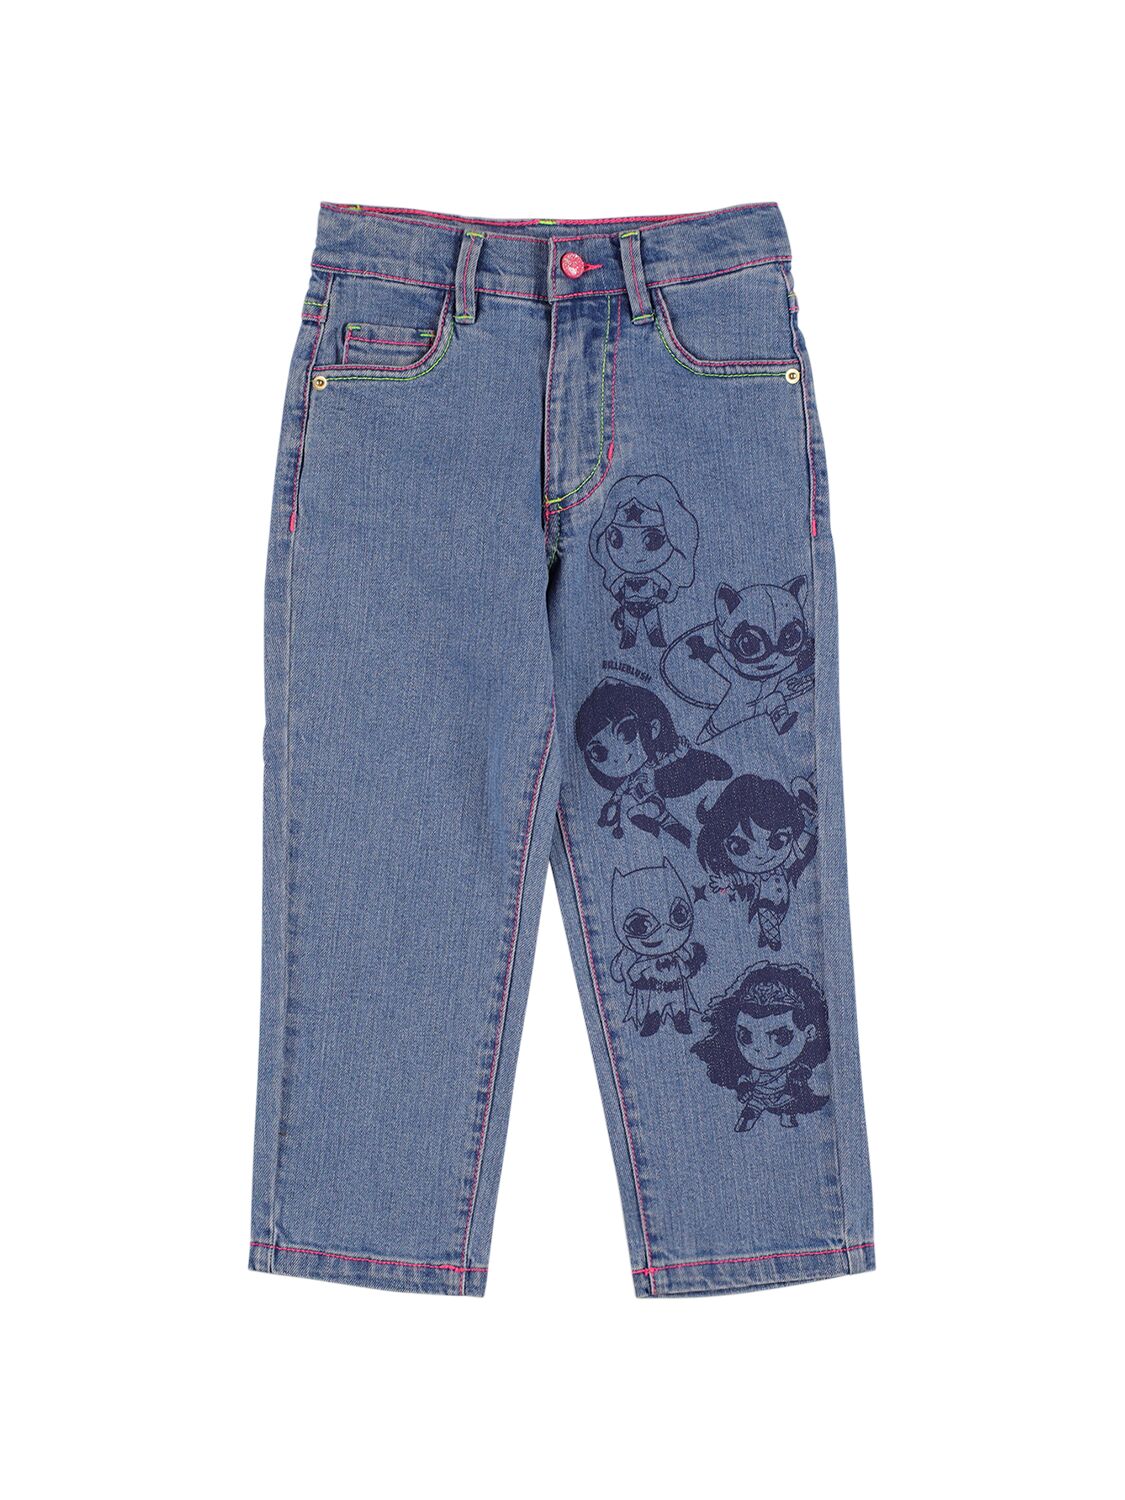 Image of Printed Stretch Cotton Denim Jeans